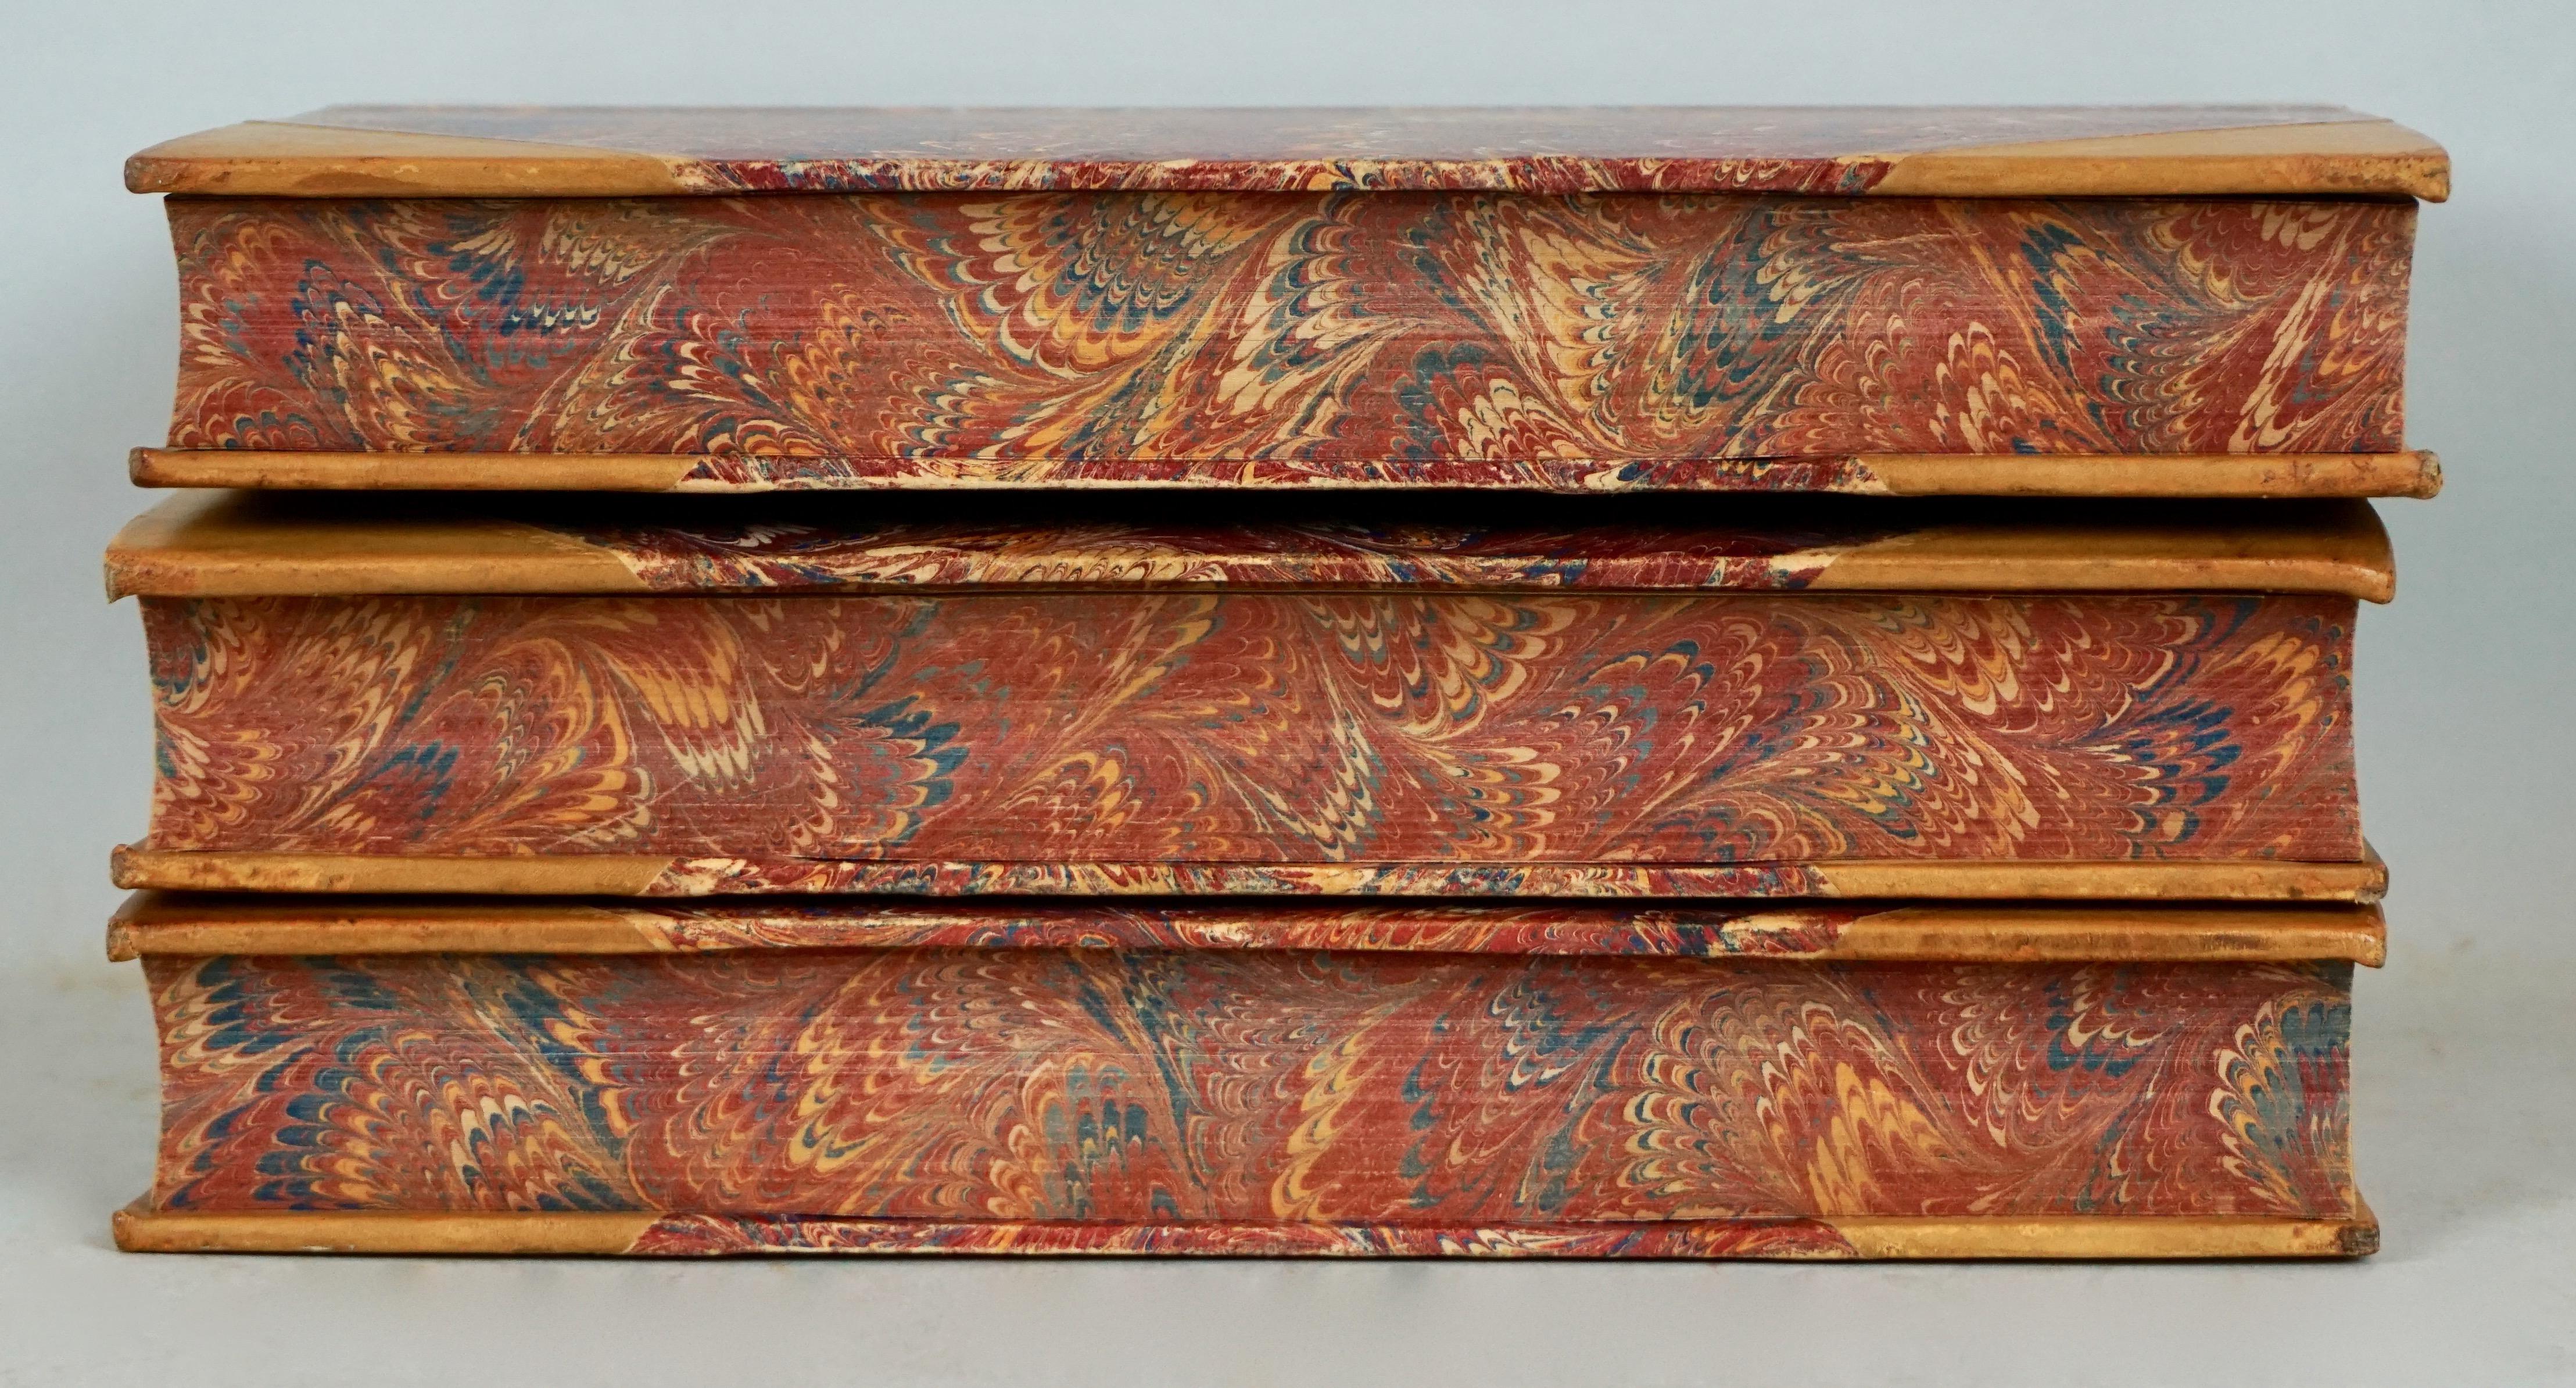 Late 19th Century Lambs Works 5 Leather Bound Volumes with Marbleized Endpapers and Marbled Pages